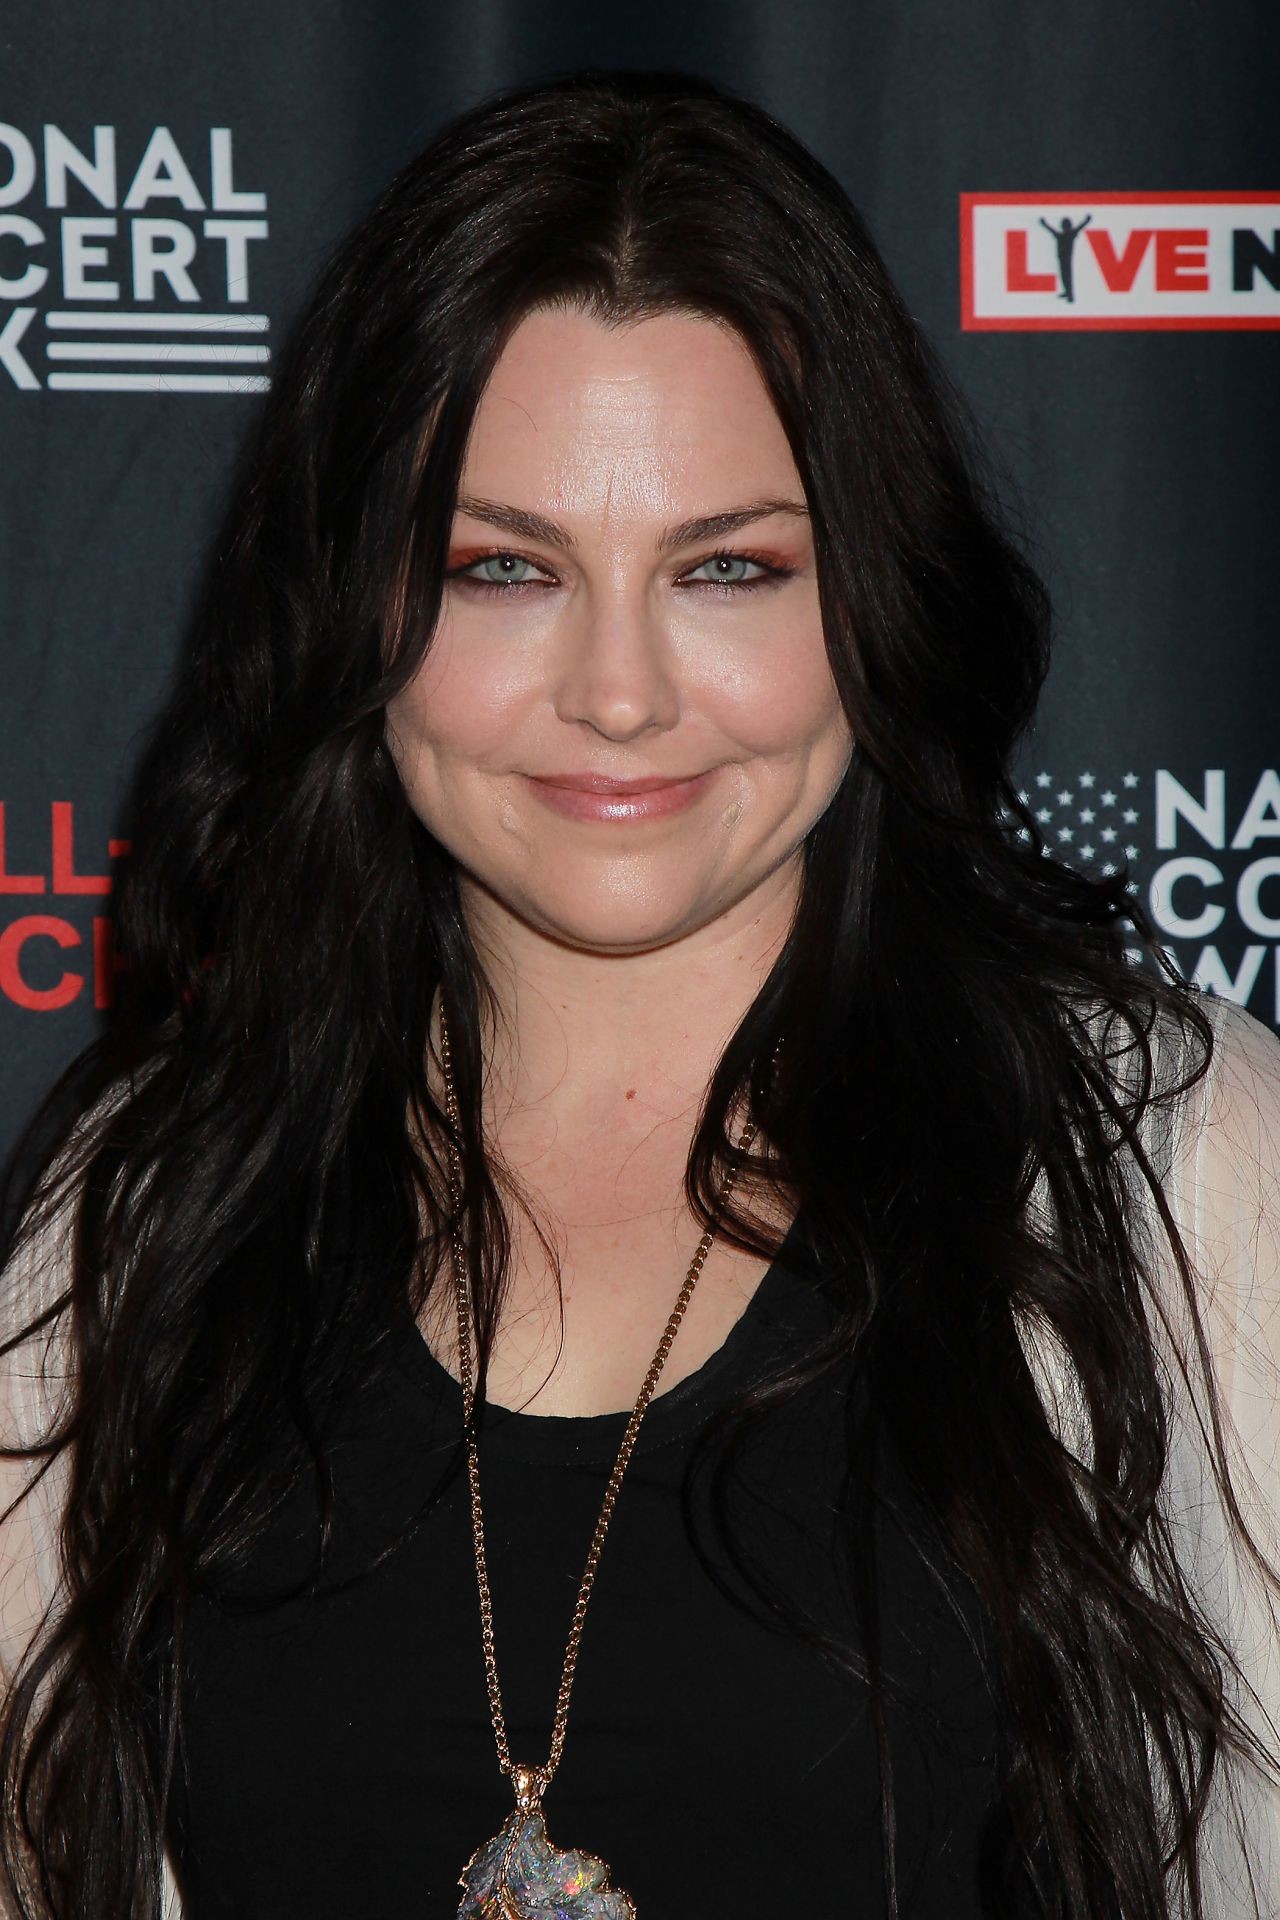 1280x1920 Amy Lee – Live Nation Launches National Concert Week in NY 04/30/2018